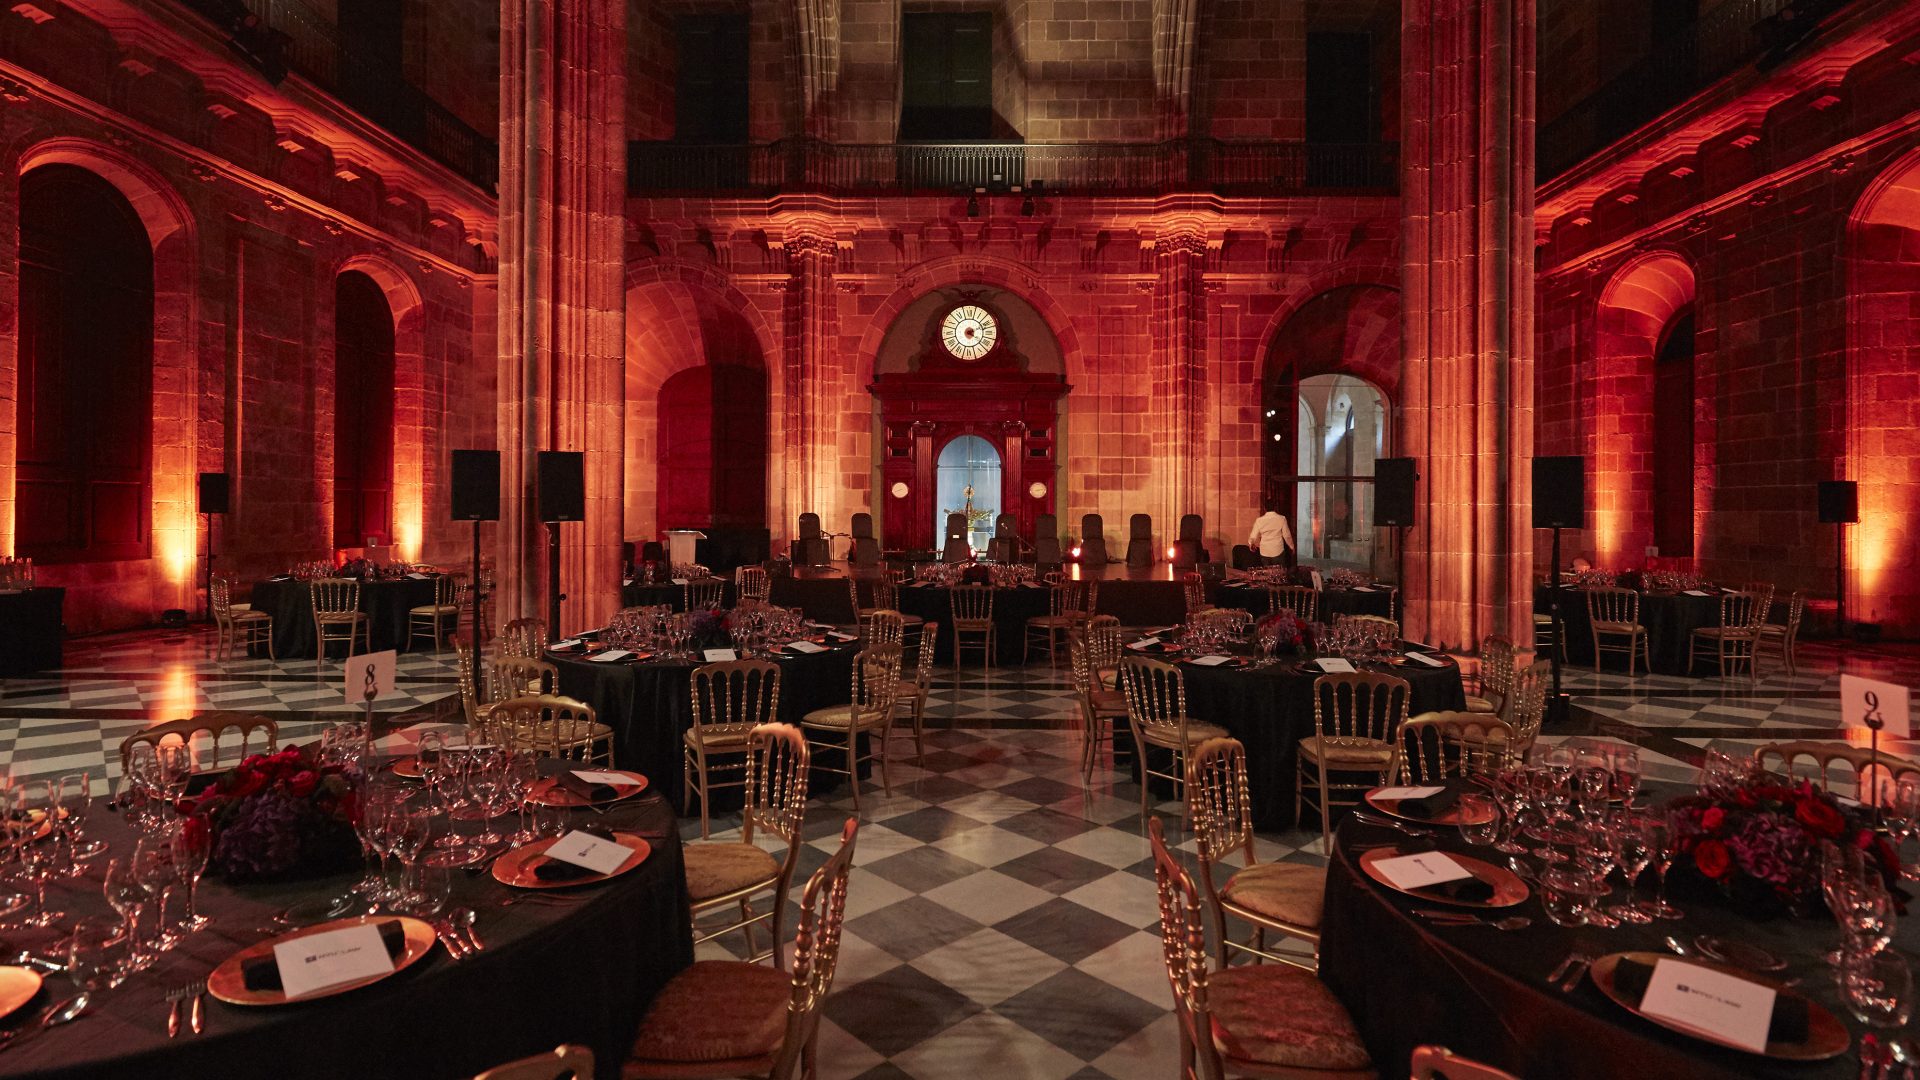 Gala dinner setup in a historical event venue in Barcelona